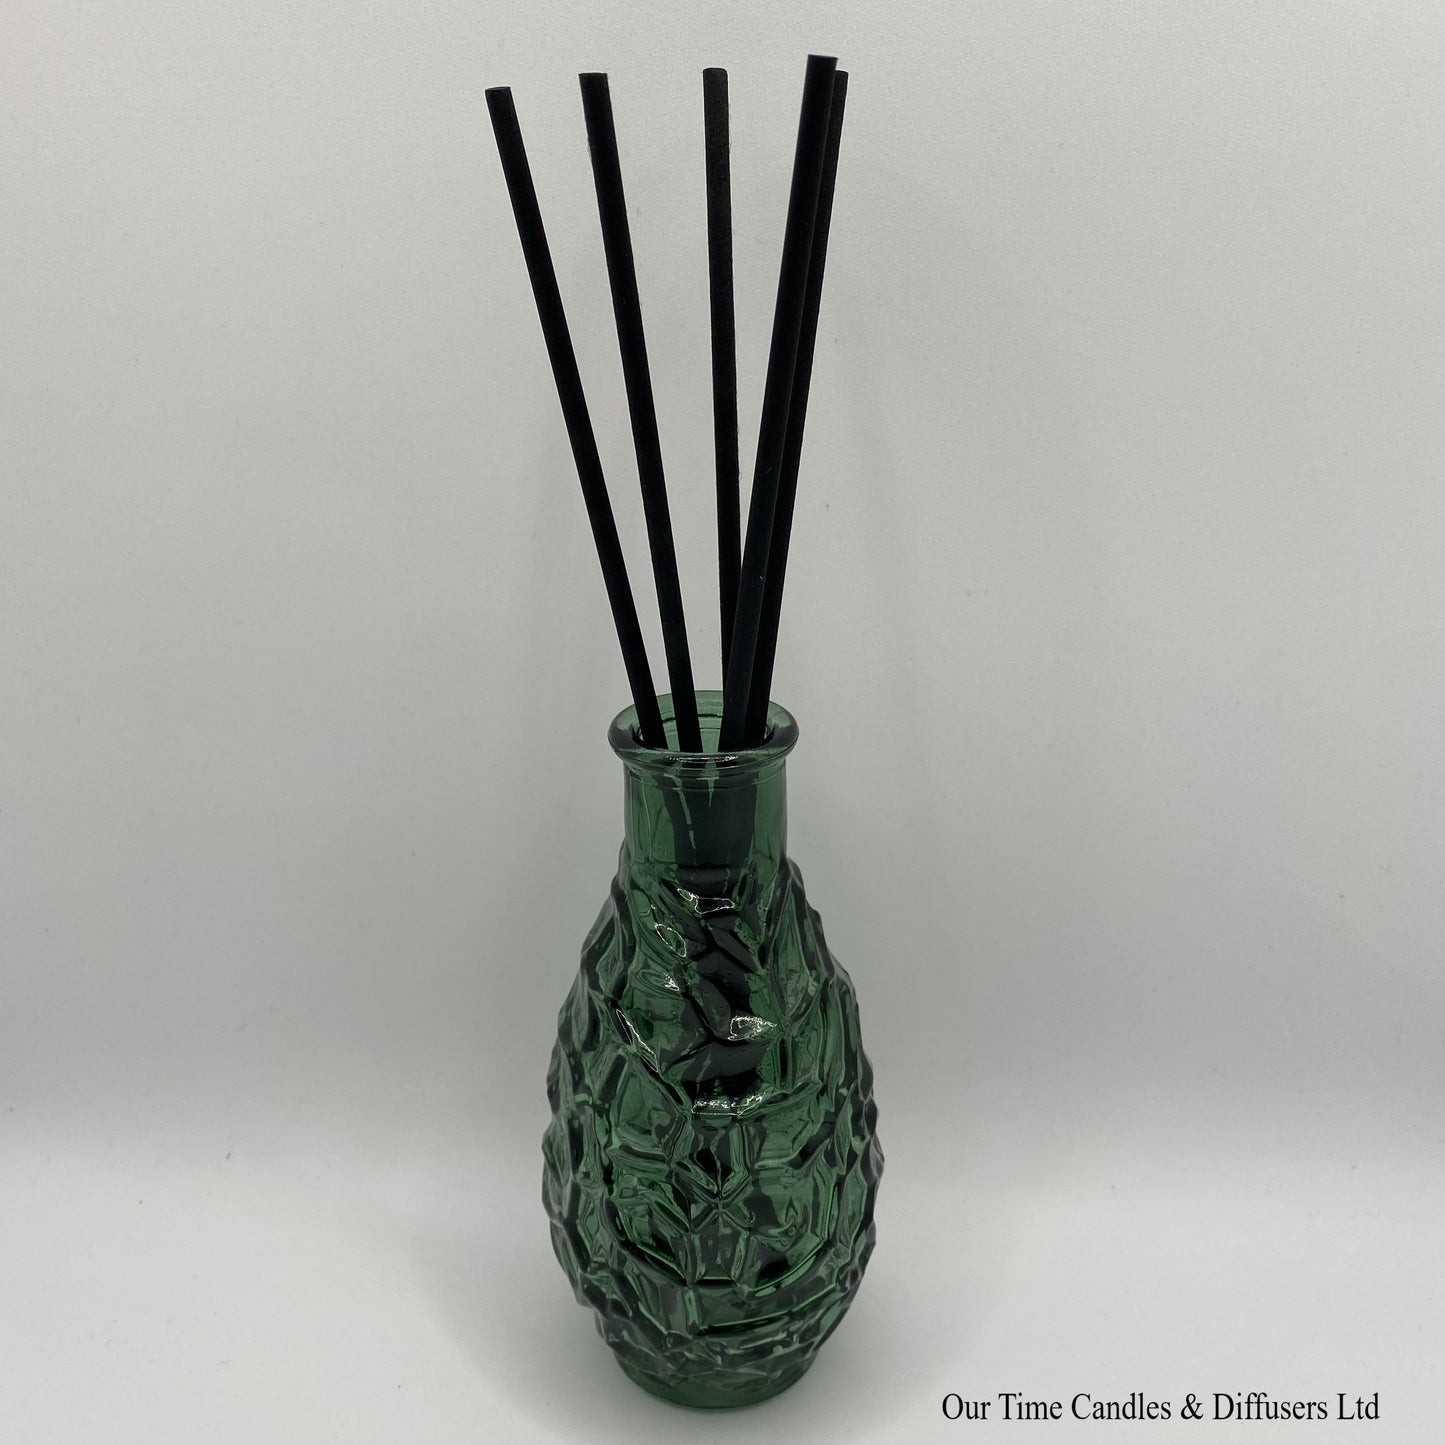 Decorative diffuser vase in green shown with reeds